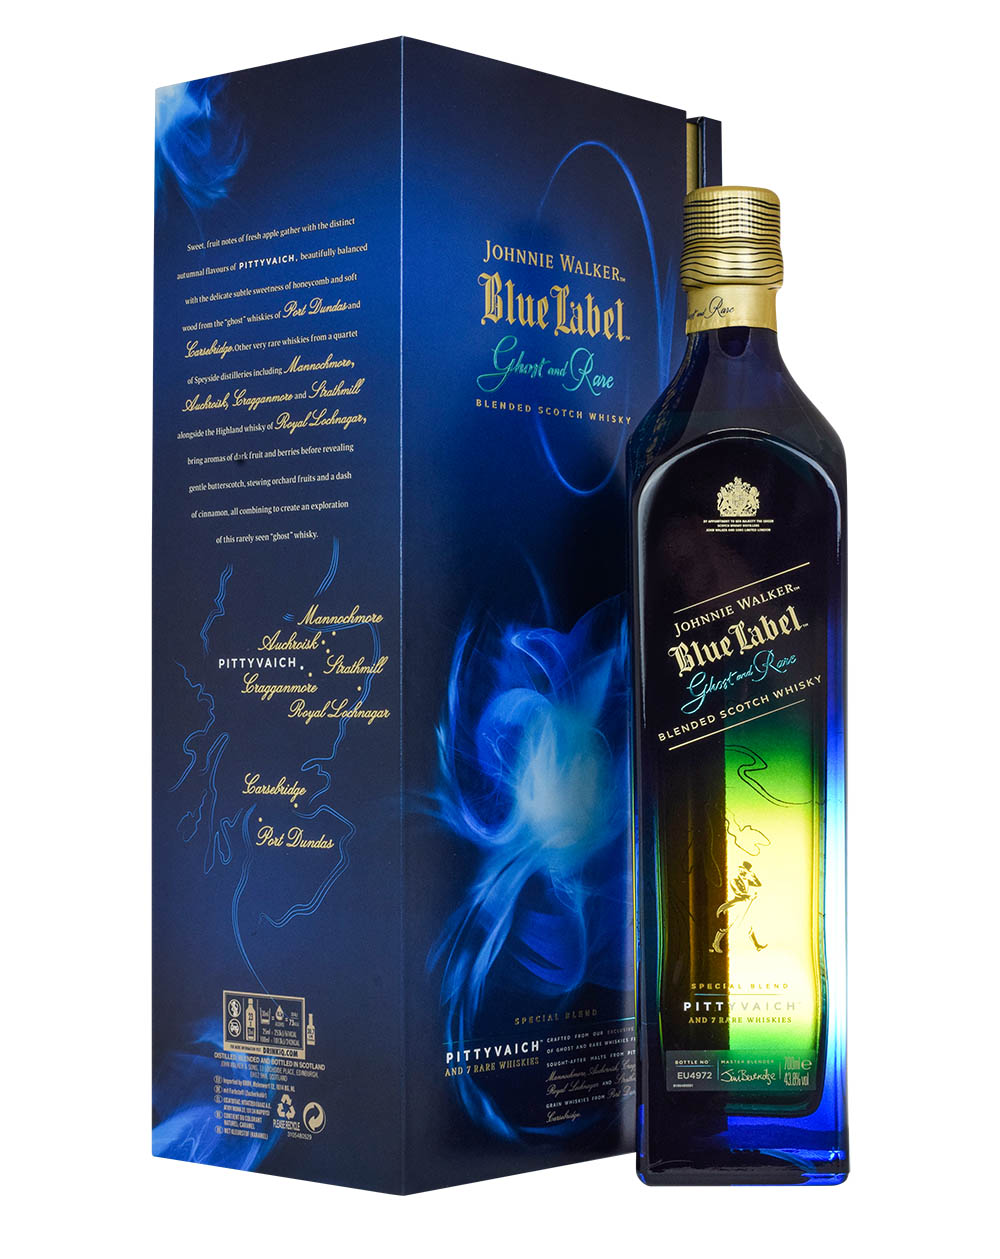 Johnnie Walker Blue Label Ghost And Rare Pittyvaich Box Must Have Malts MHM